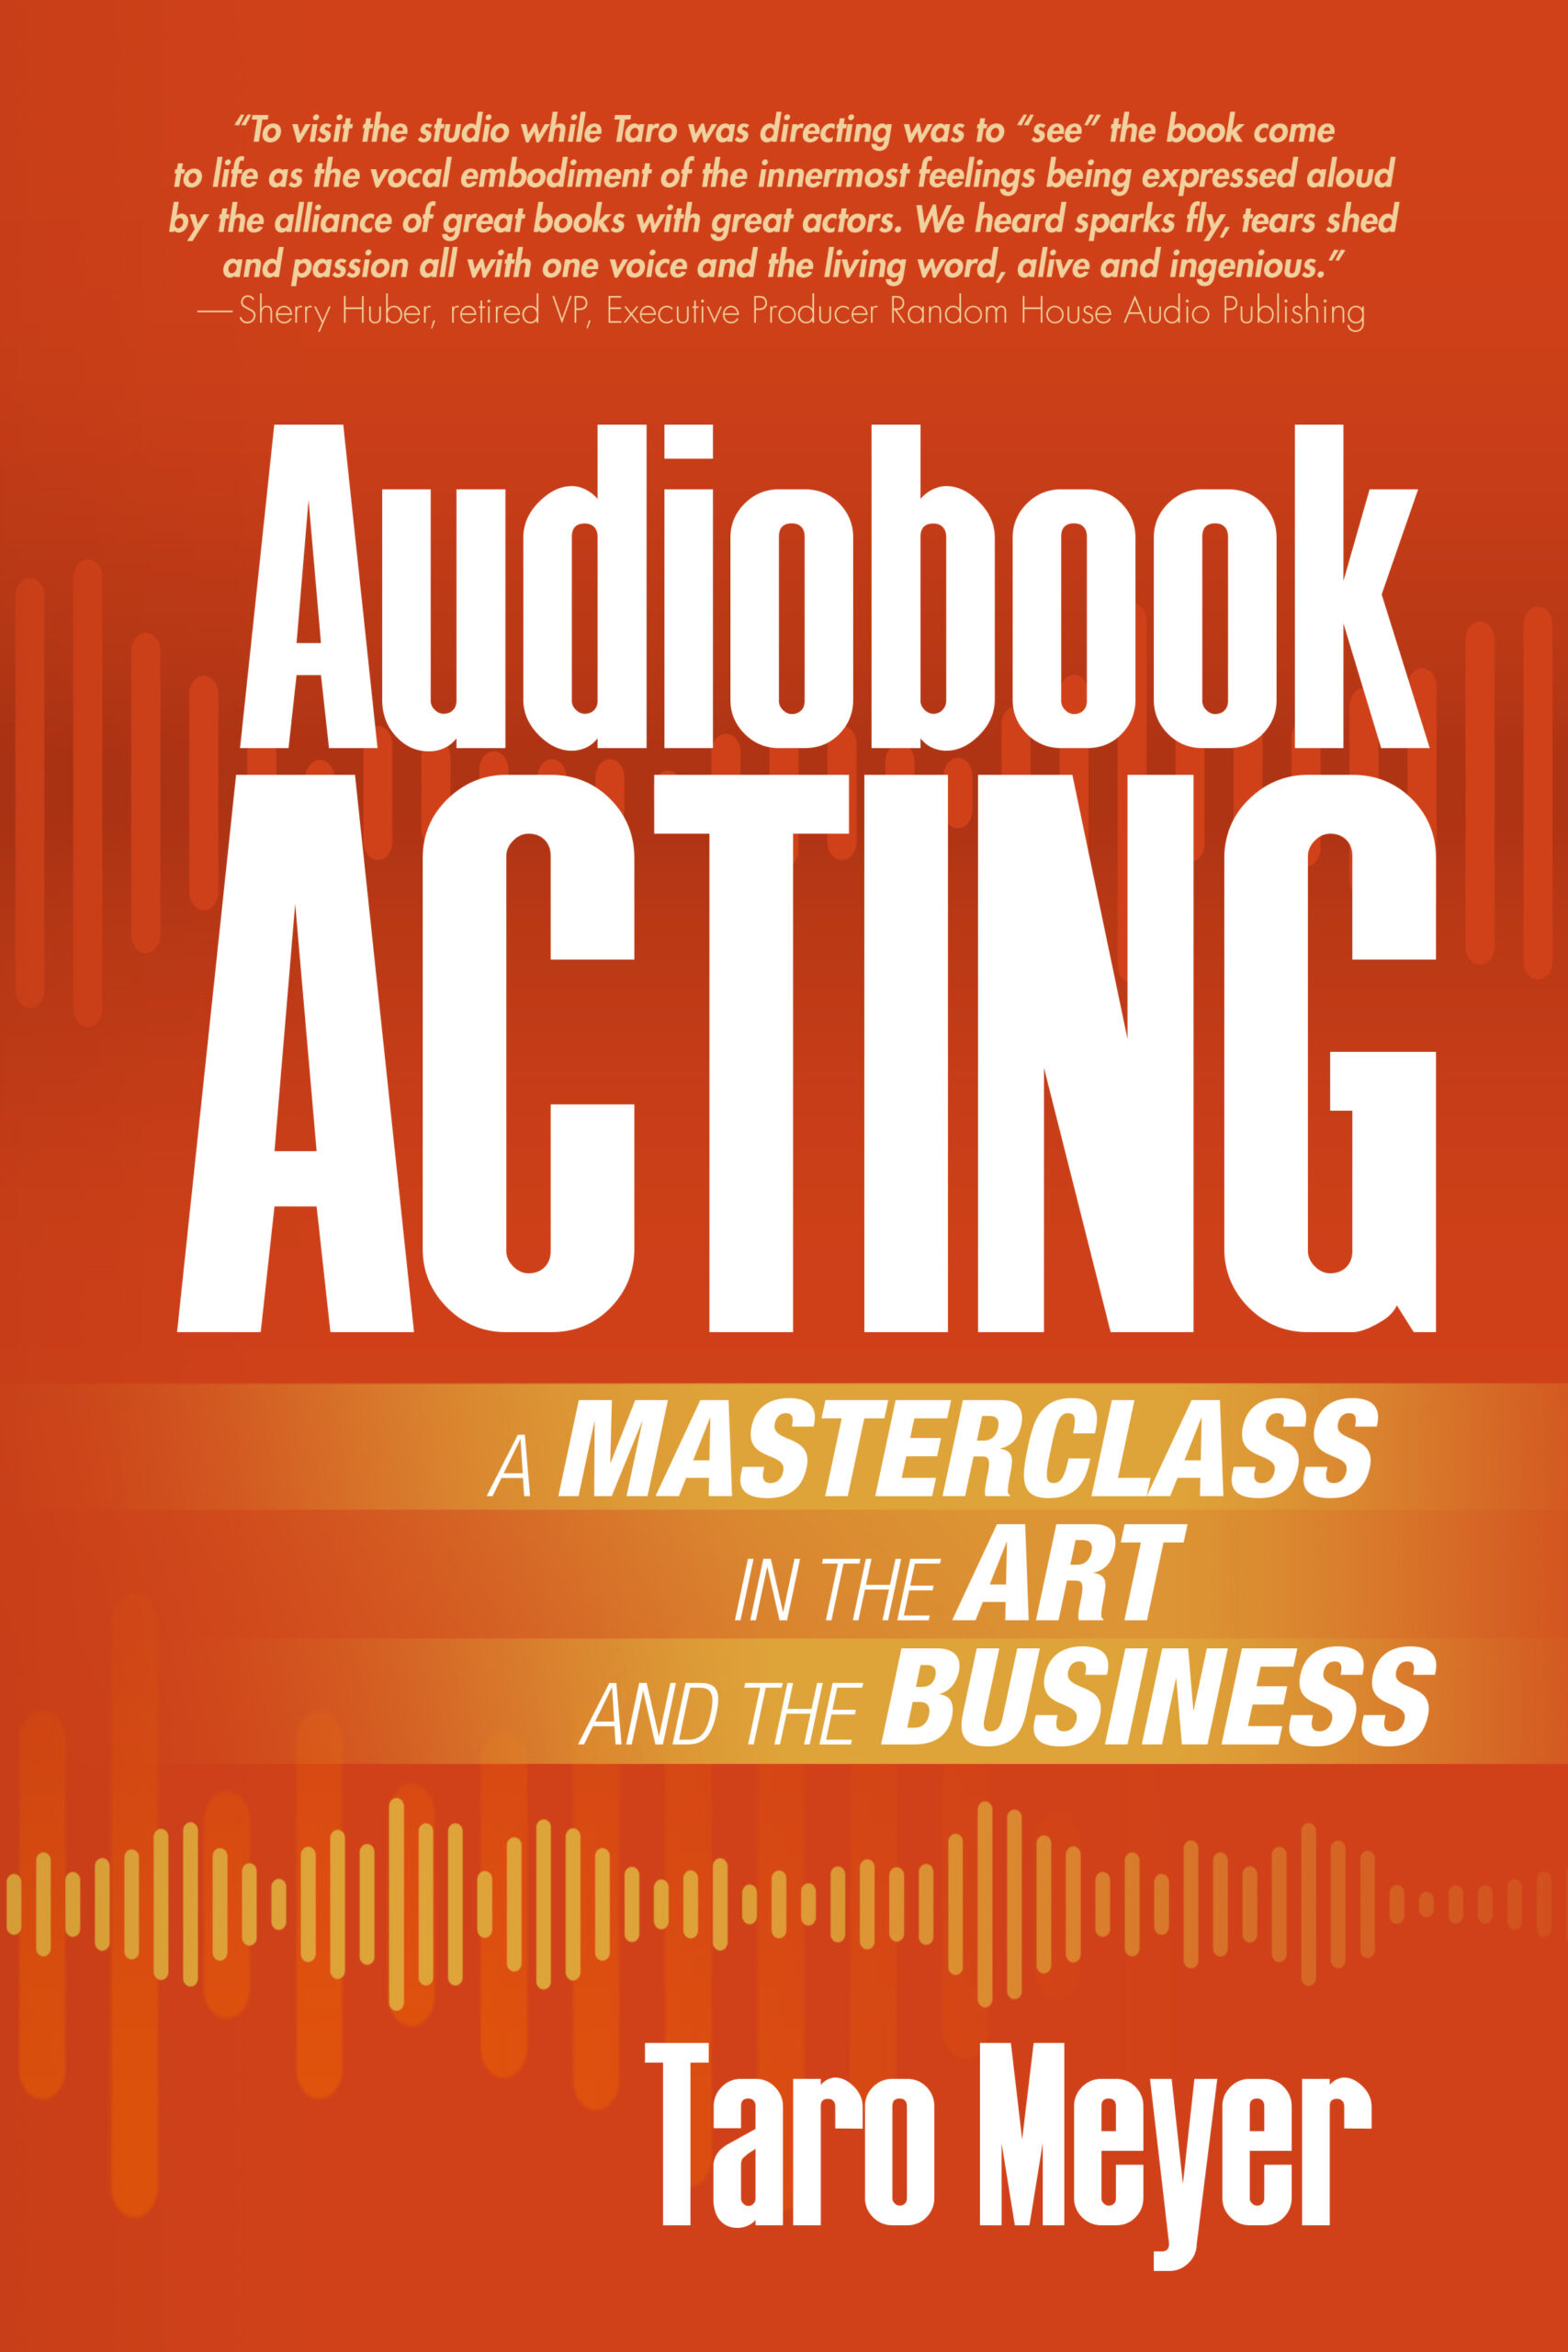 Audiobook ACTING A MASTERCLASS in the ART and the BUSINESS by Grammy winning Director/Producer Taro Meyer